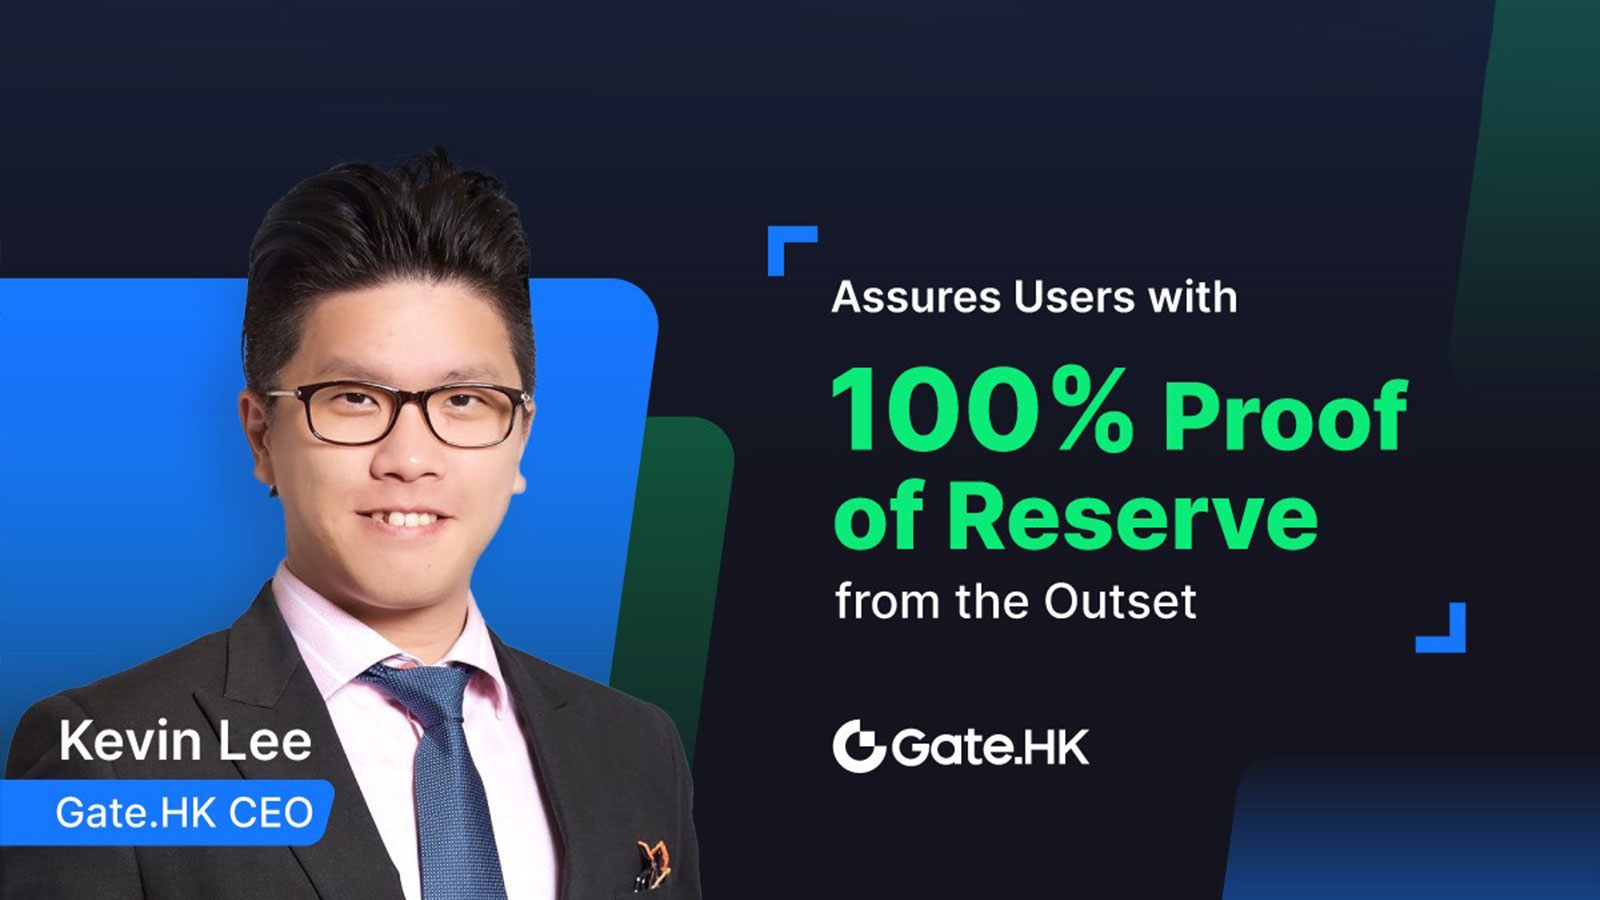 Gate.HK CEO Kevin Lee Assures Users With 100% Proof of Reserve From Outset